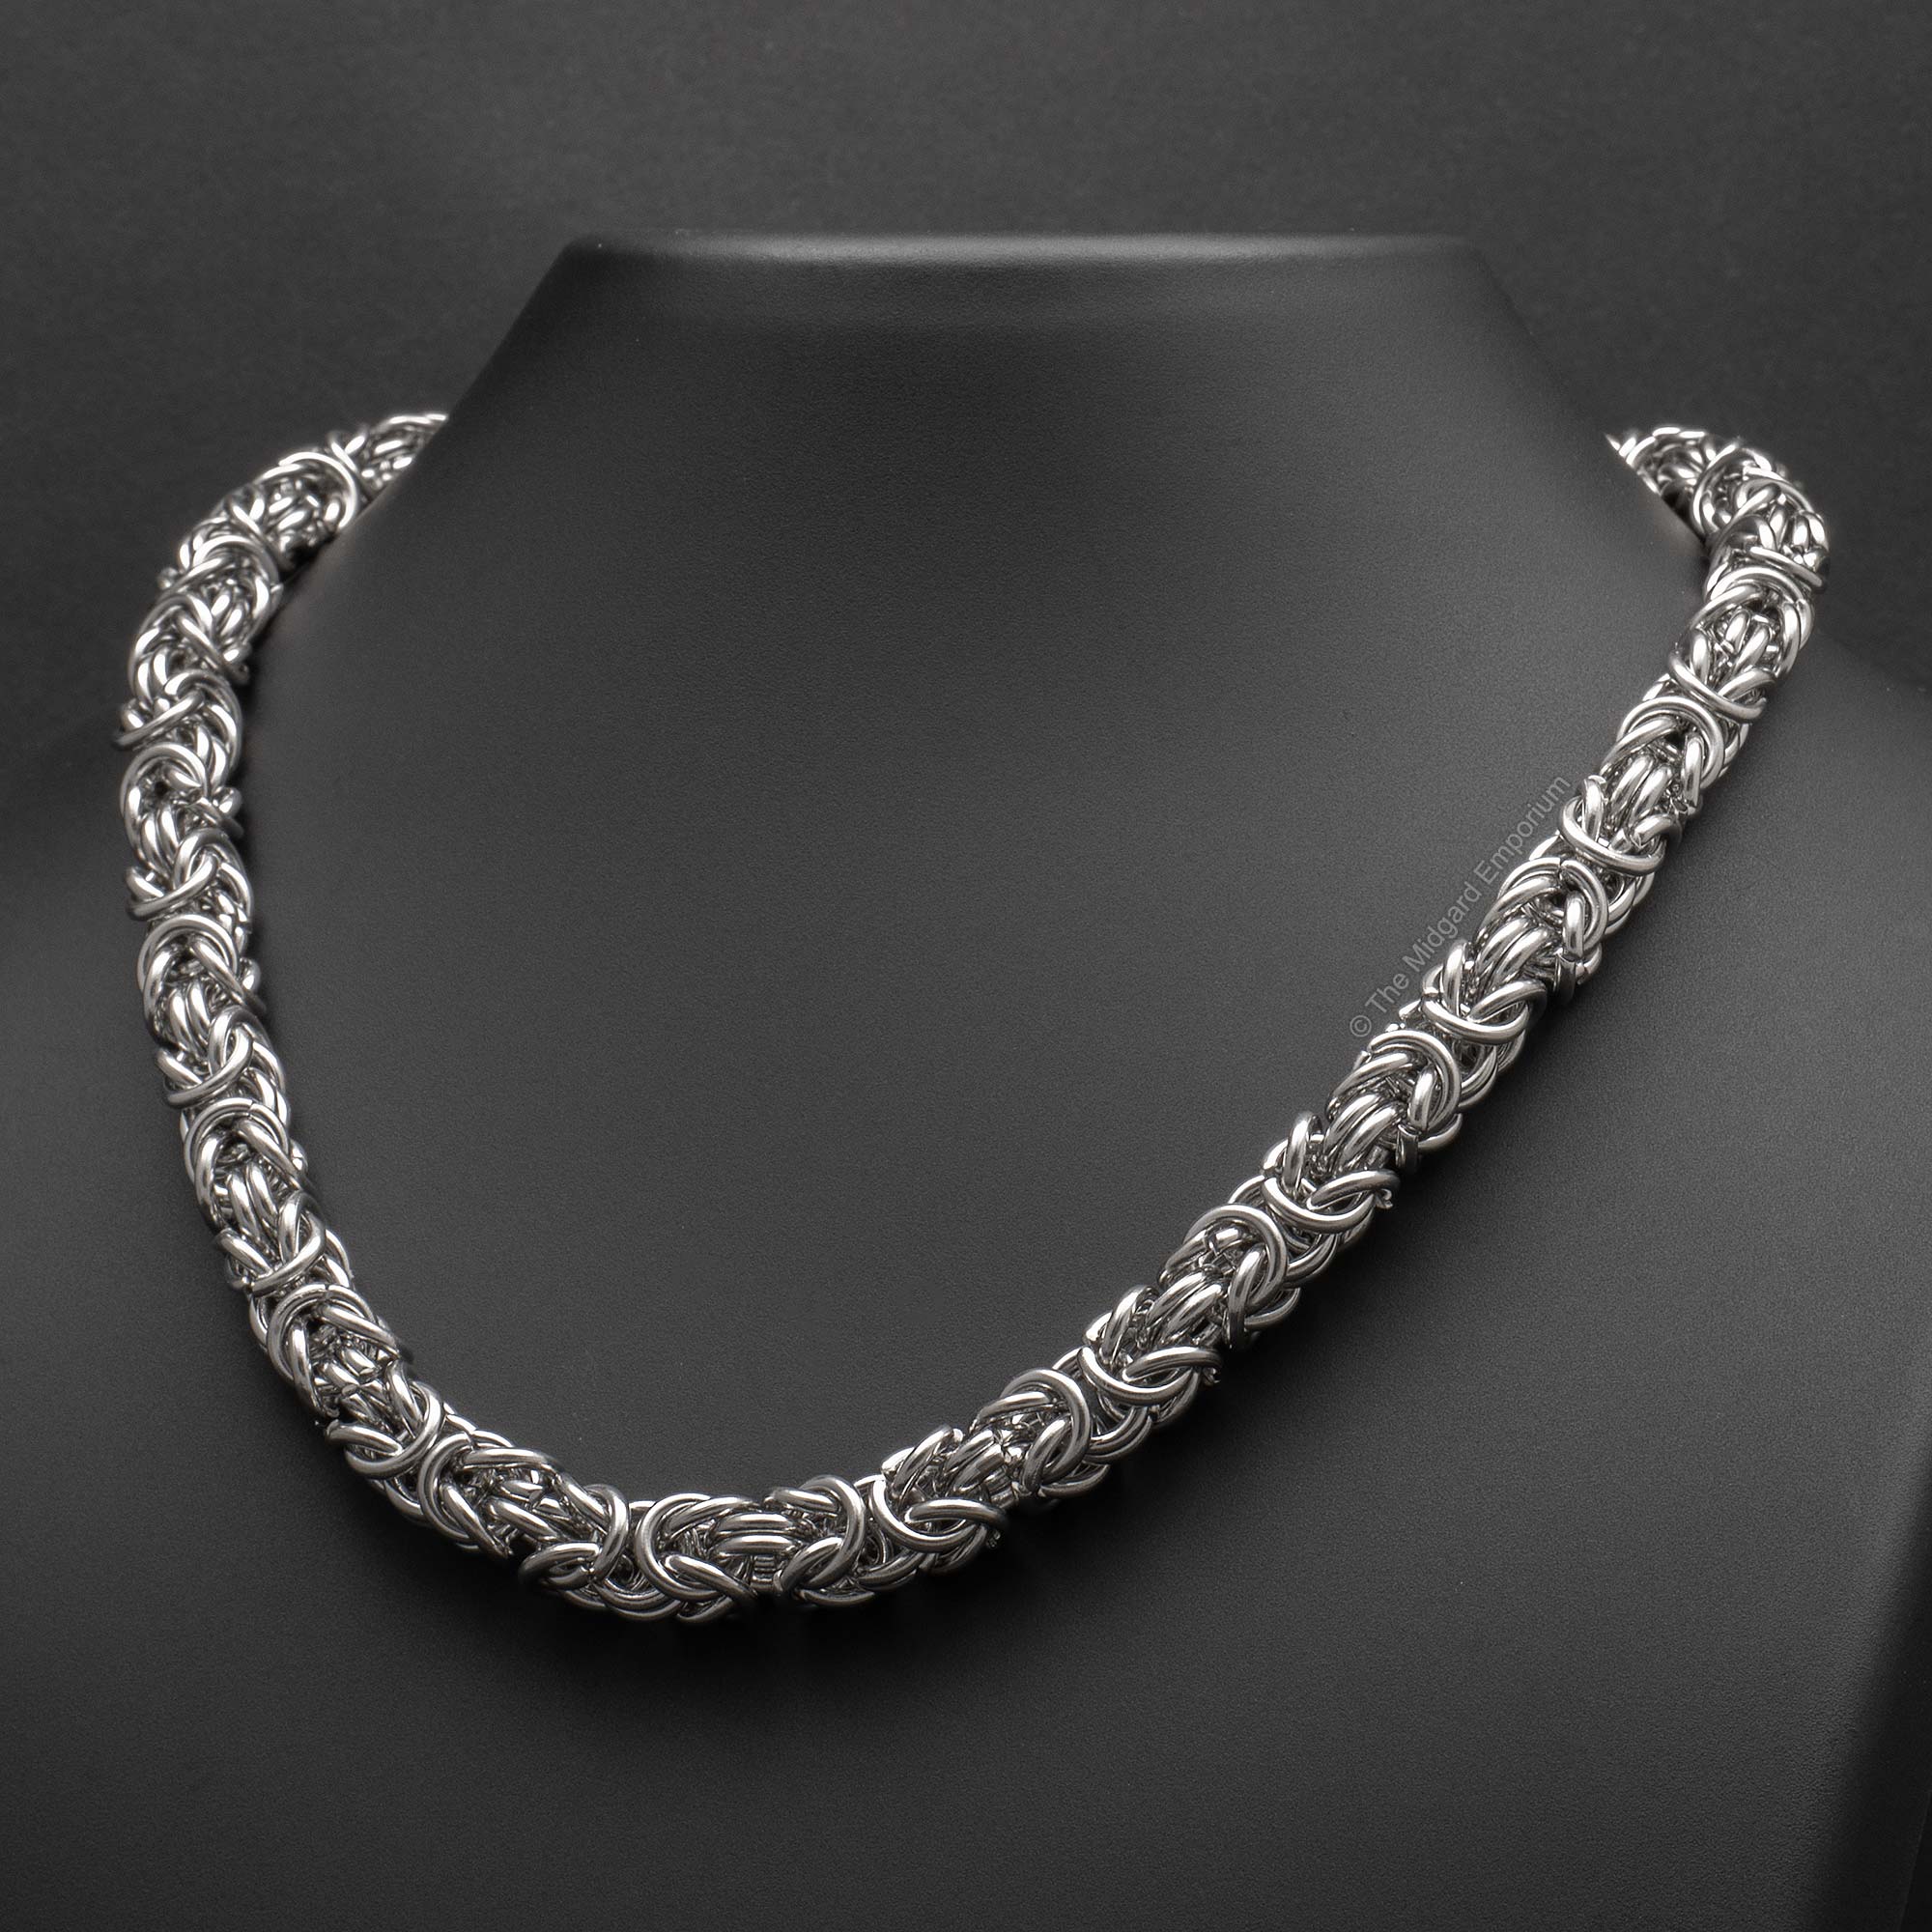 8mm Stainless Steel King Chain Necklace - The Midgard Emporium